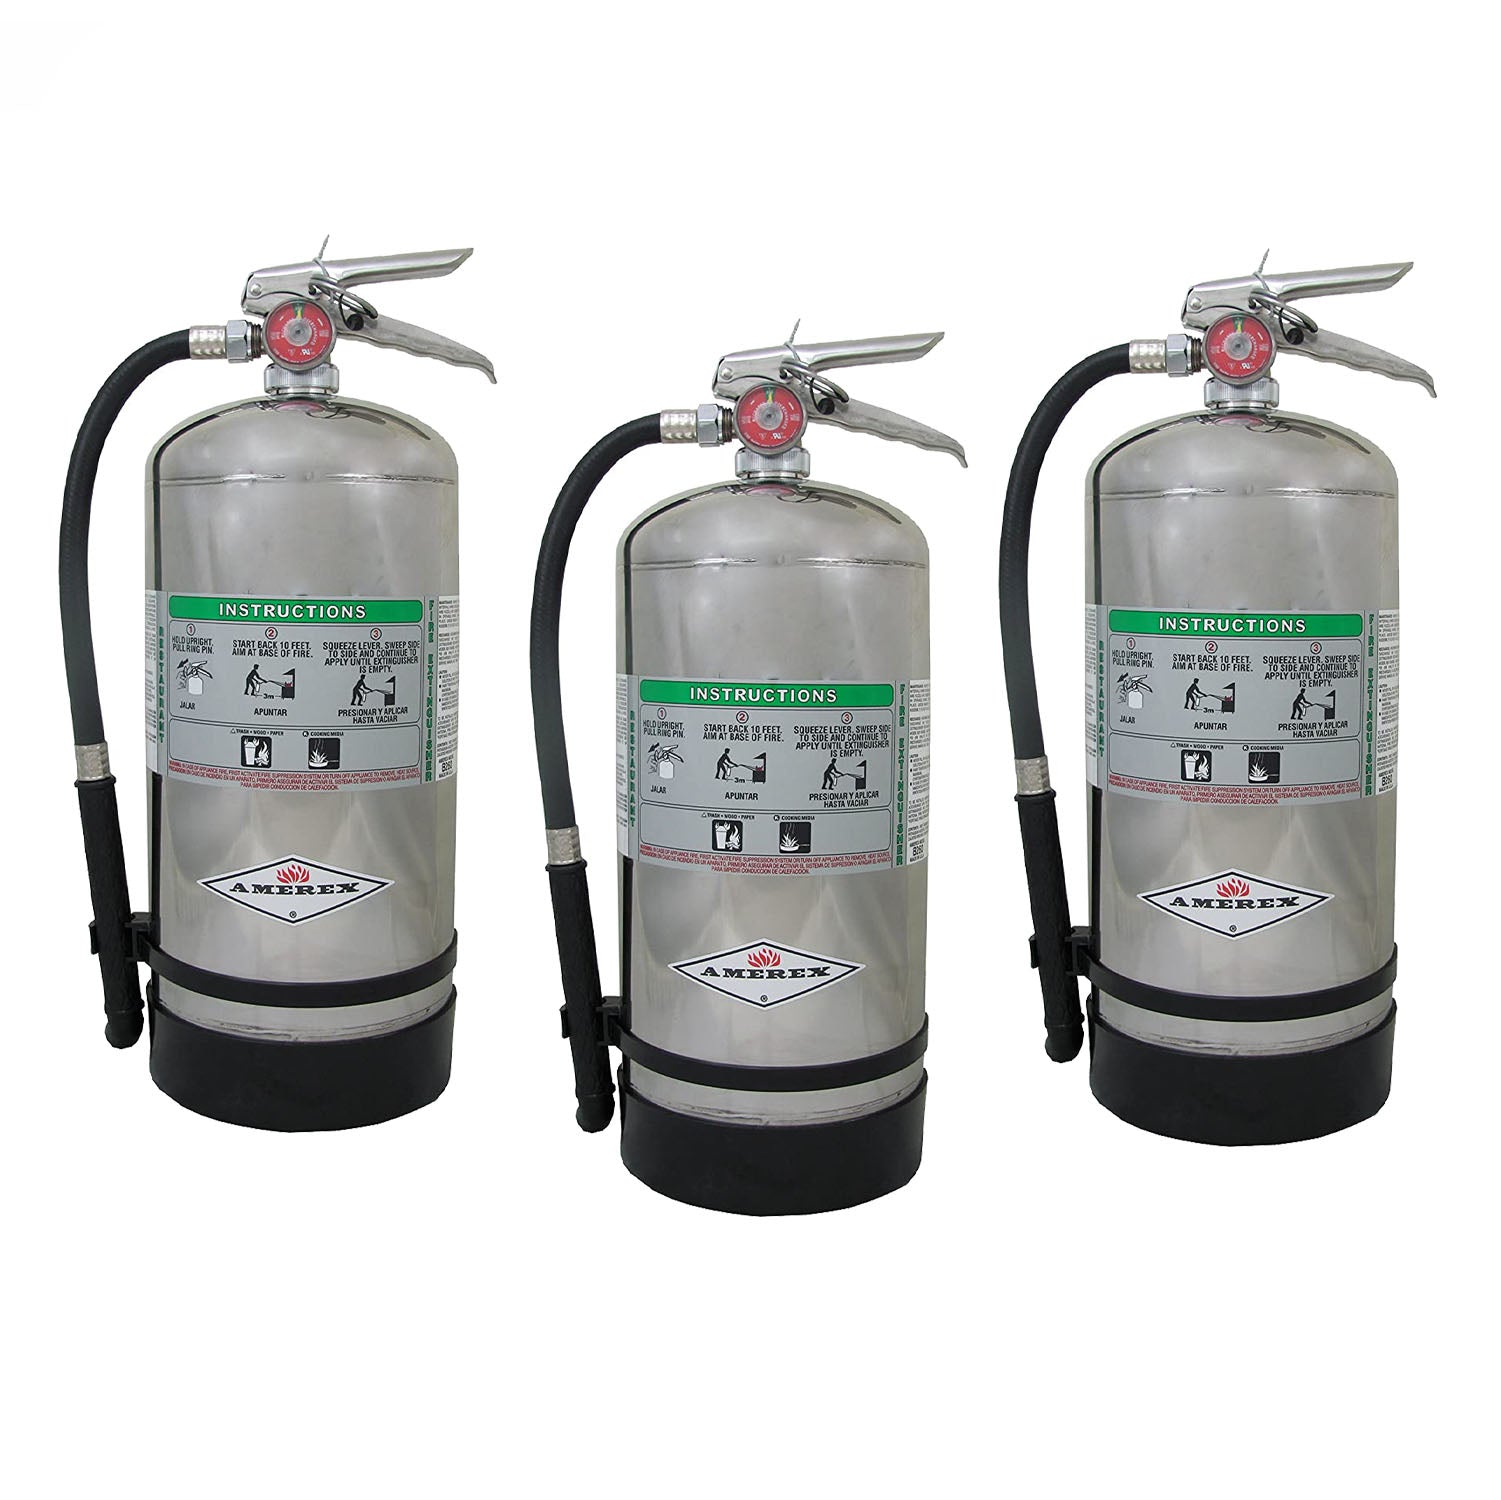 Amerex B260, 6 Liter Wet Chemical Class A K Fire Extinguisher - 3 Pack - Pro-Distributing